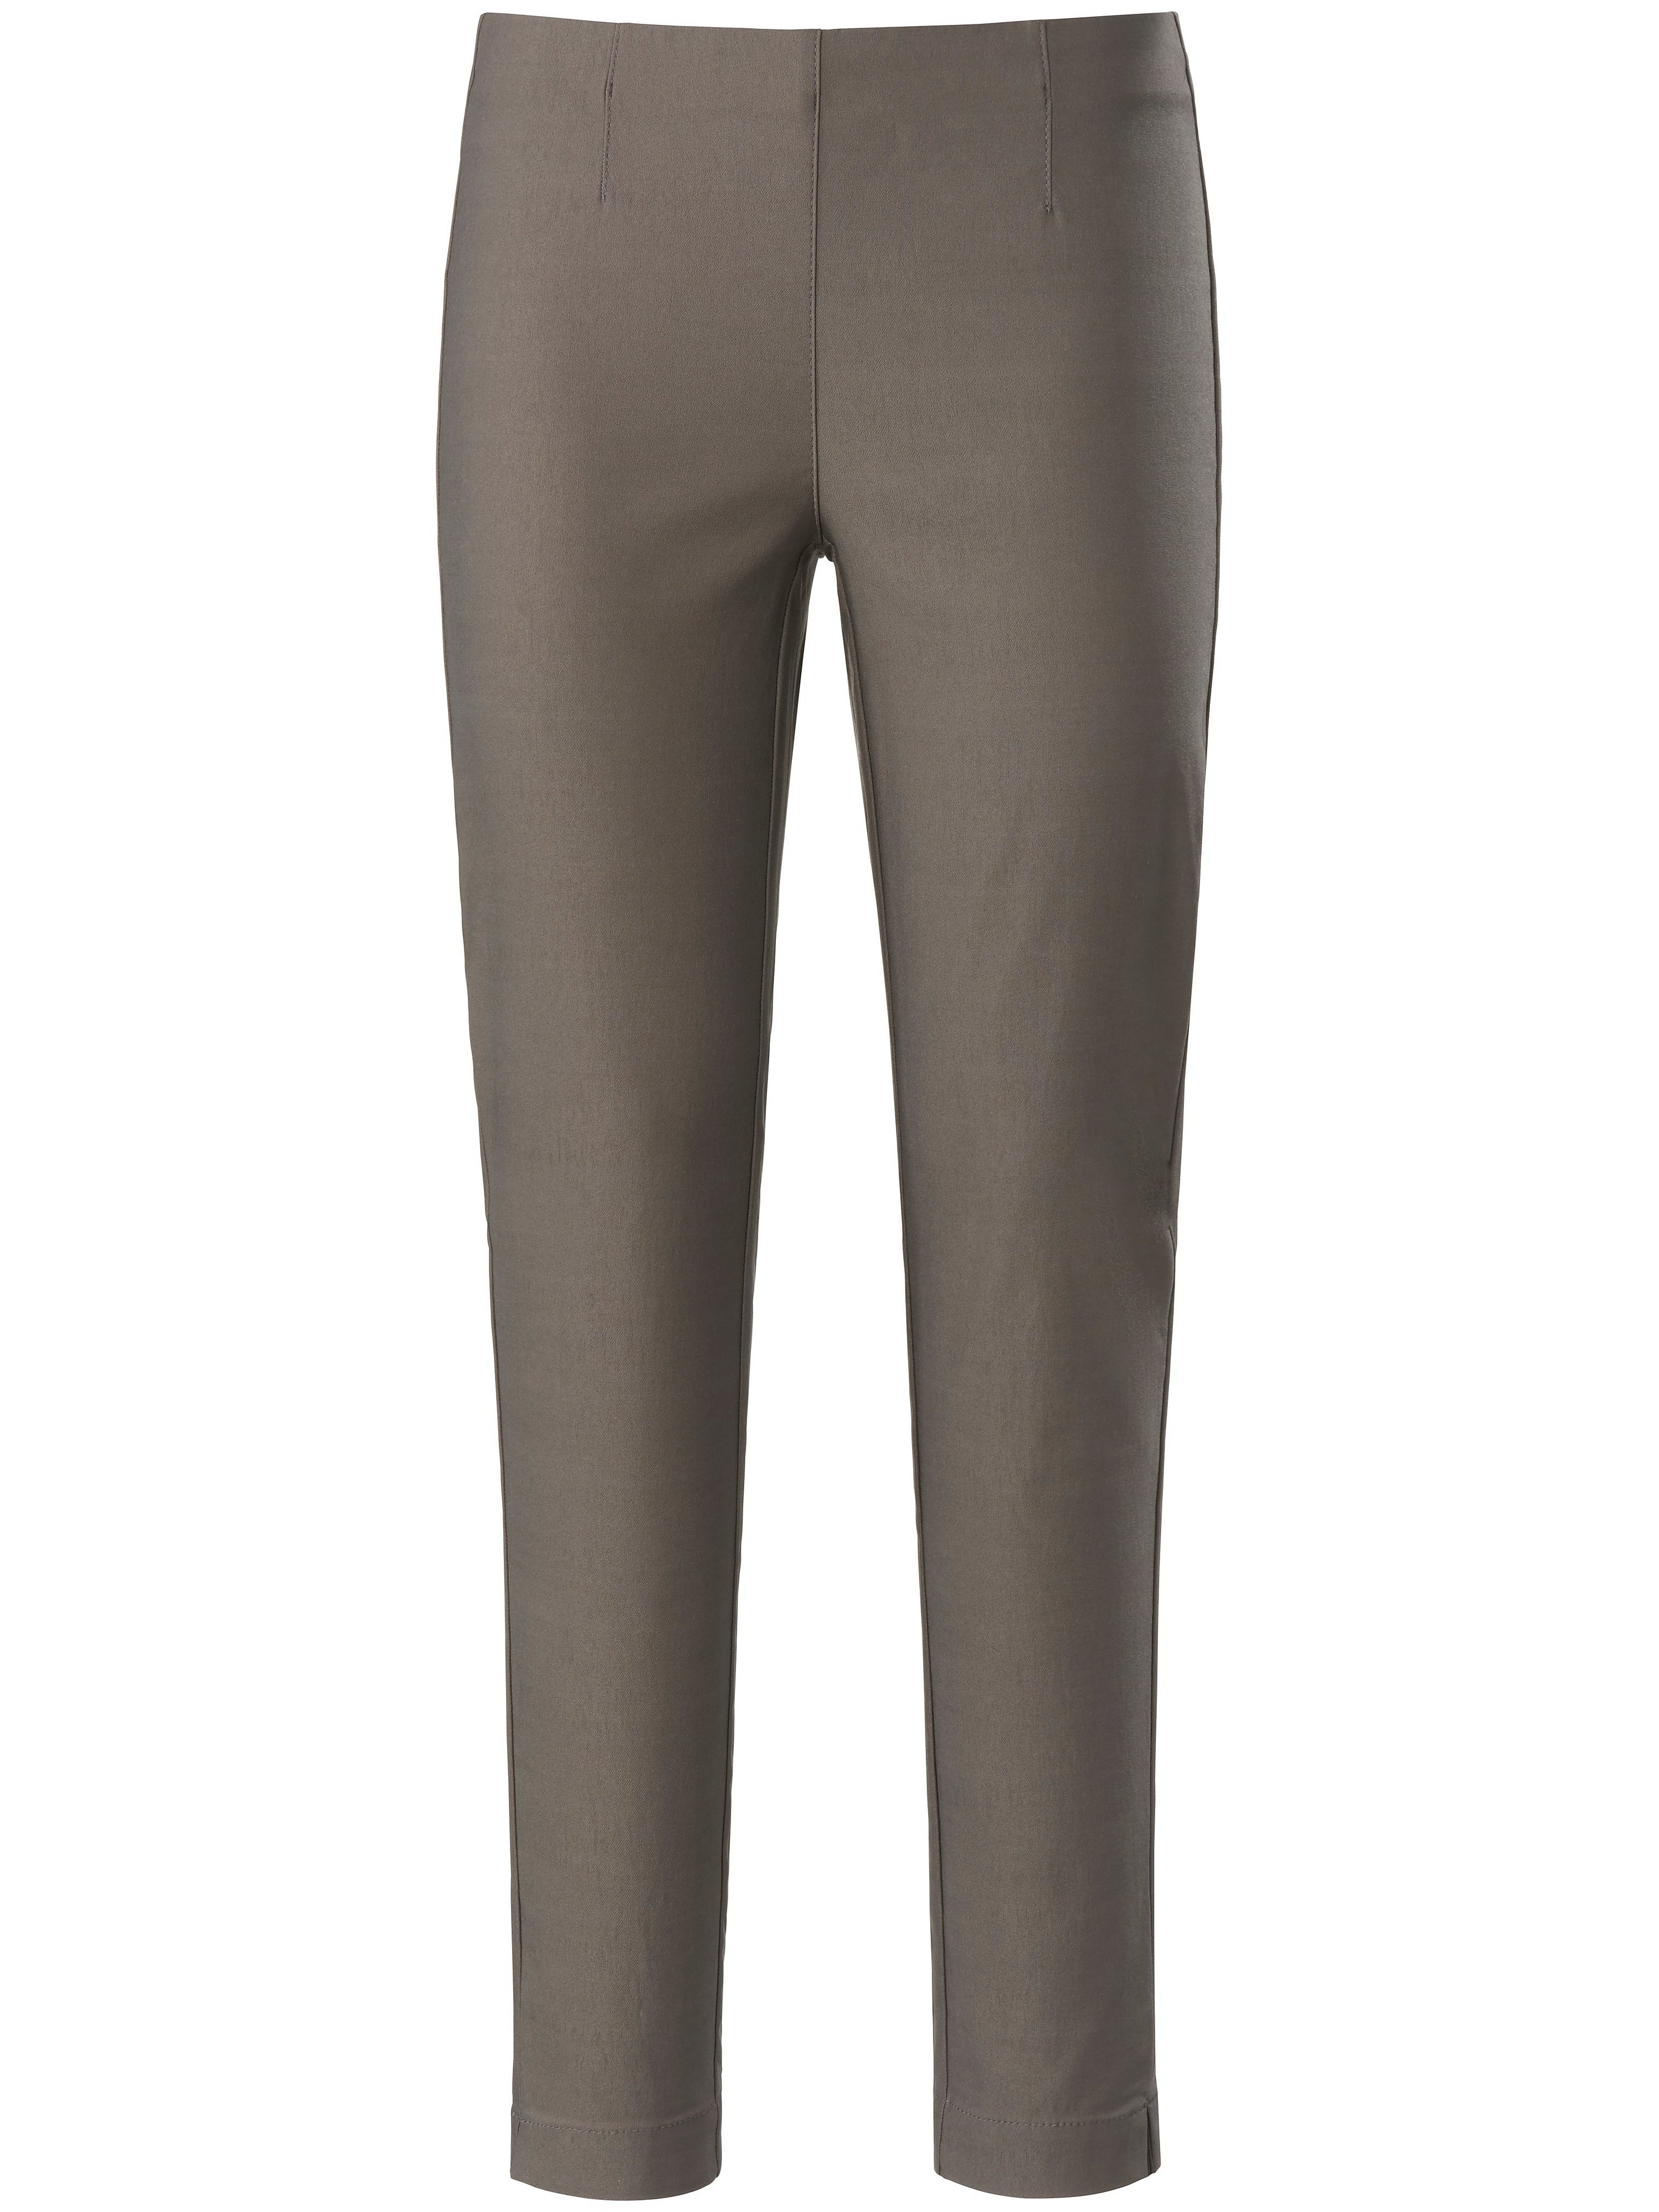 Ankle-length pull-on trousers smaller hip Peter Hahn beige